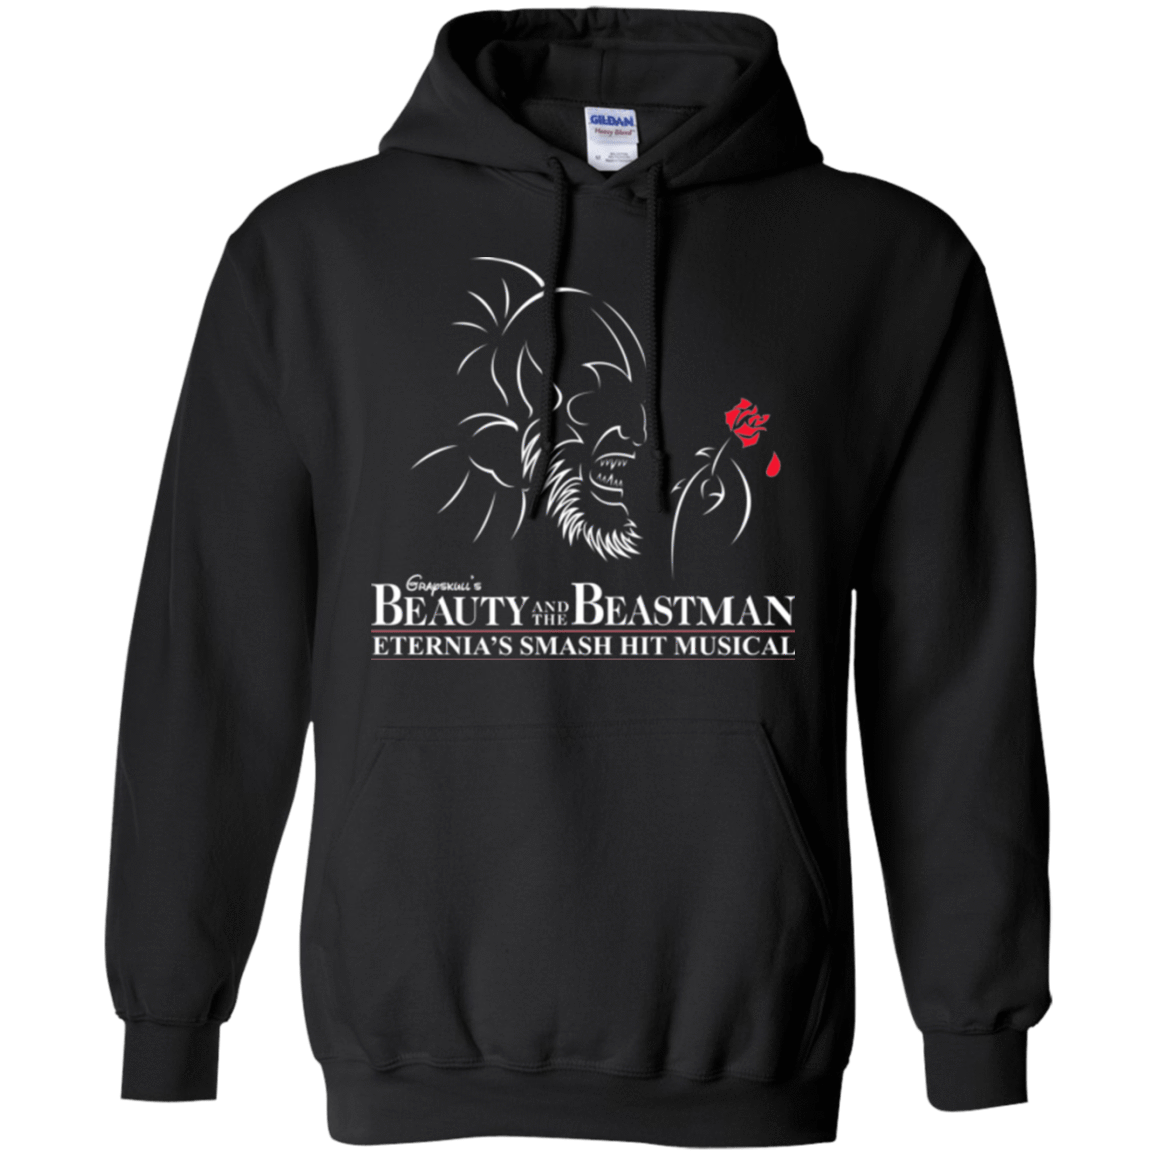 Sweatshirts Black / Small Beauty and the Beastman Pullover Hoodie